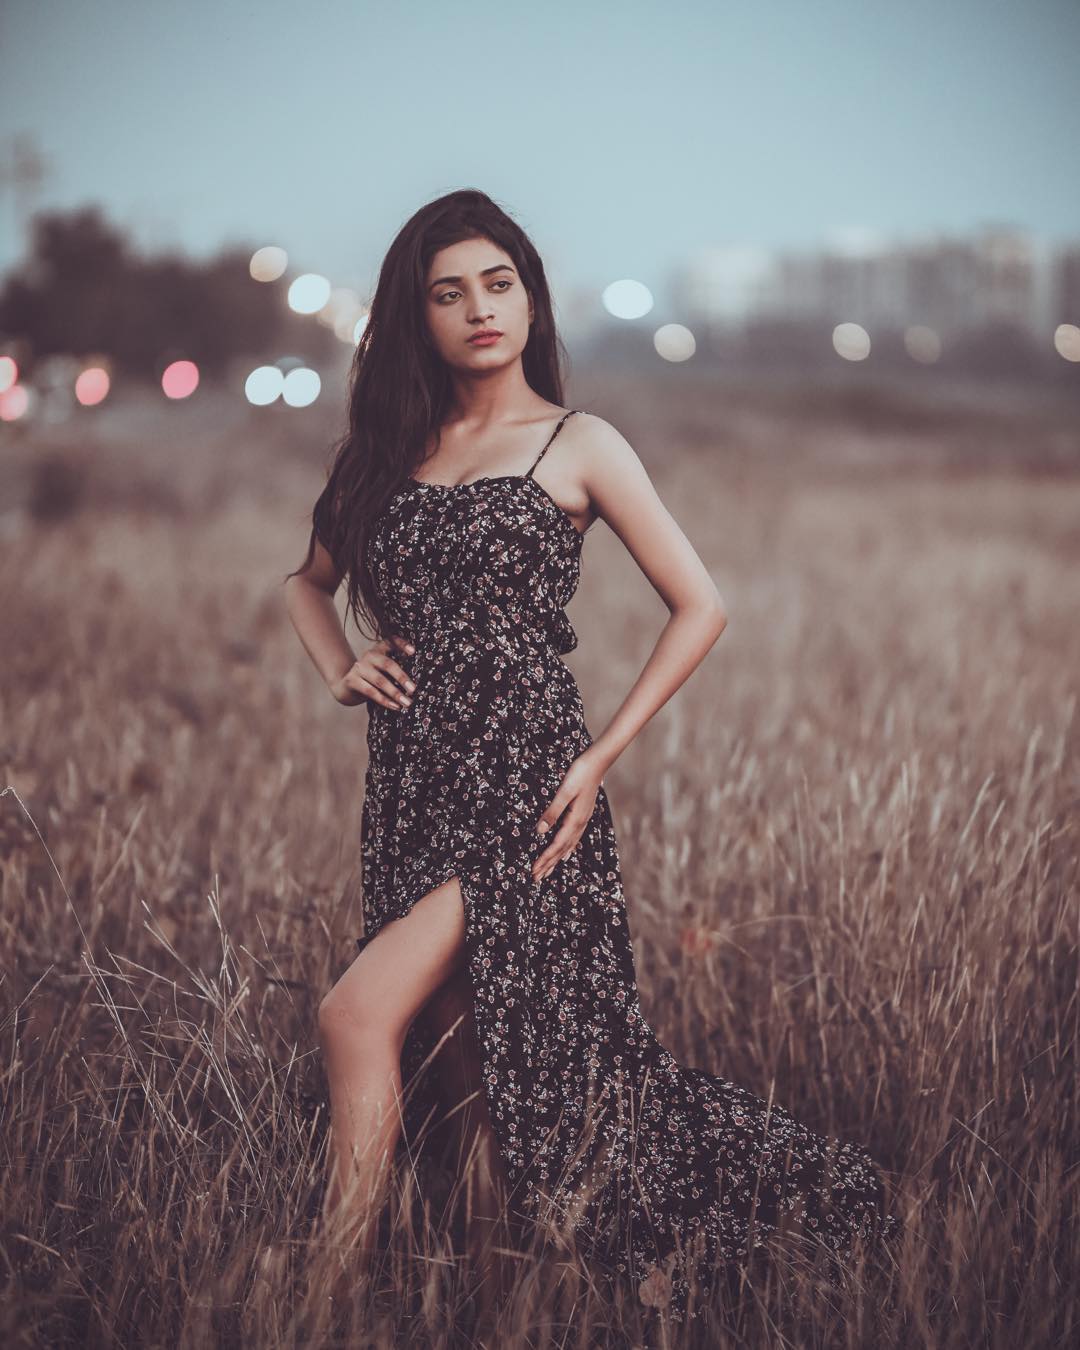 Manya Singh's Spectacular Journey To The Crown Of VLCC Femina Miss India 2020 Runner-up